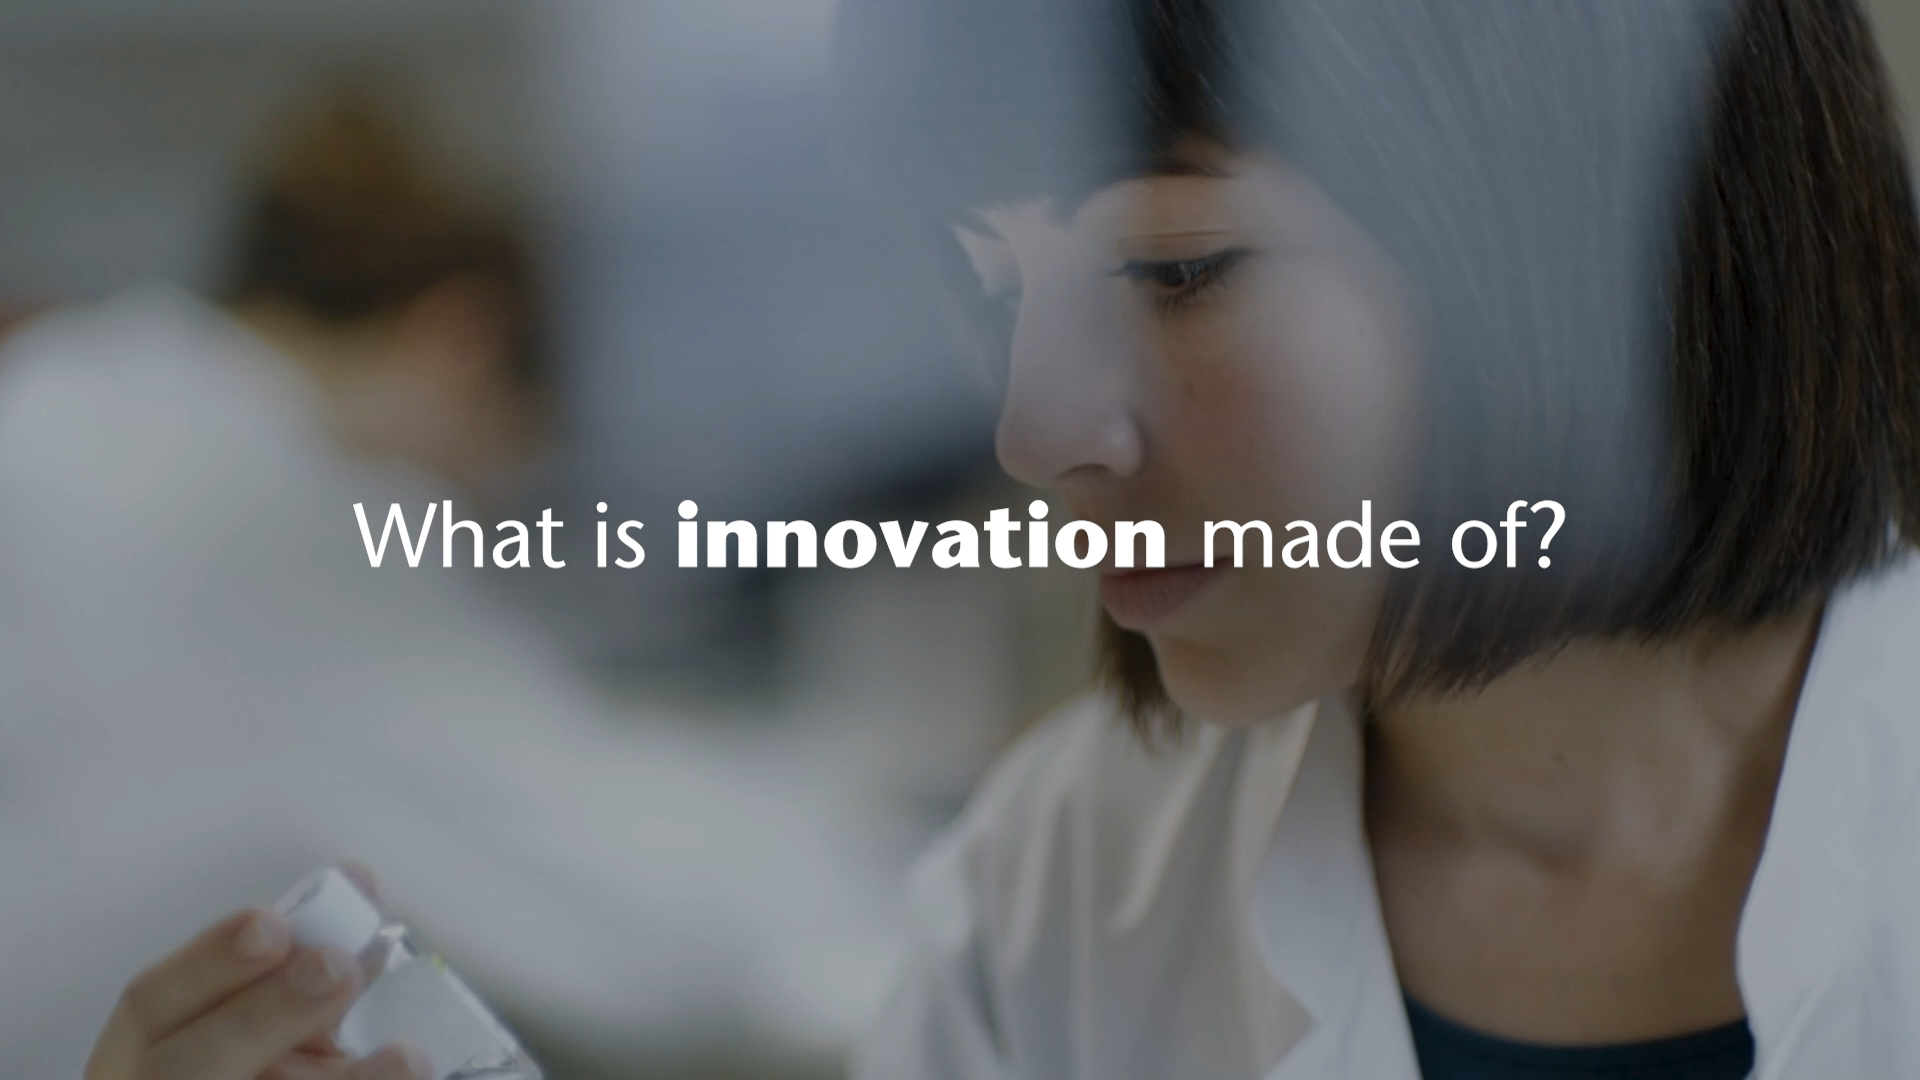 Click to find out what innovations are made of at SCHOTT.